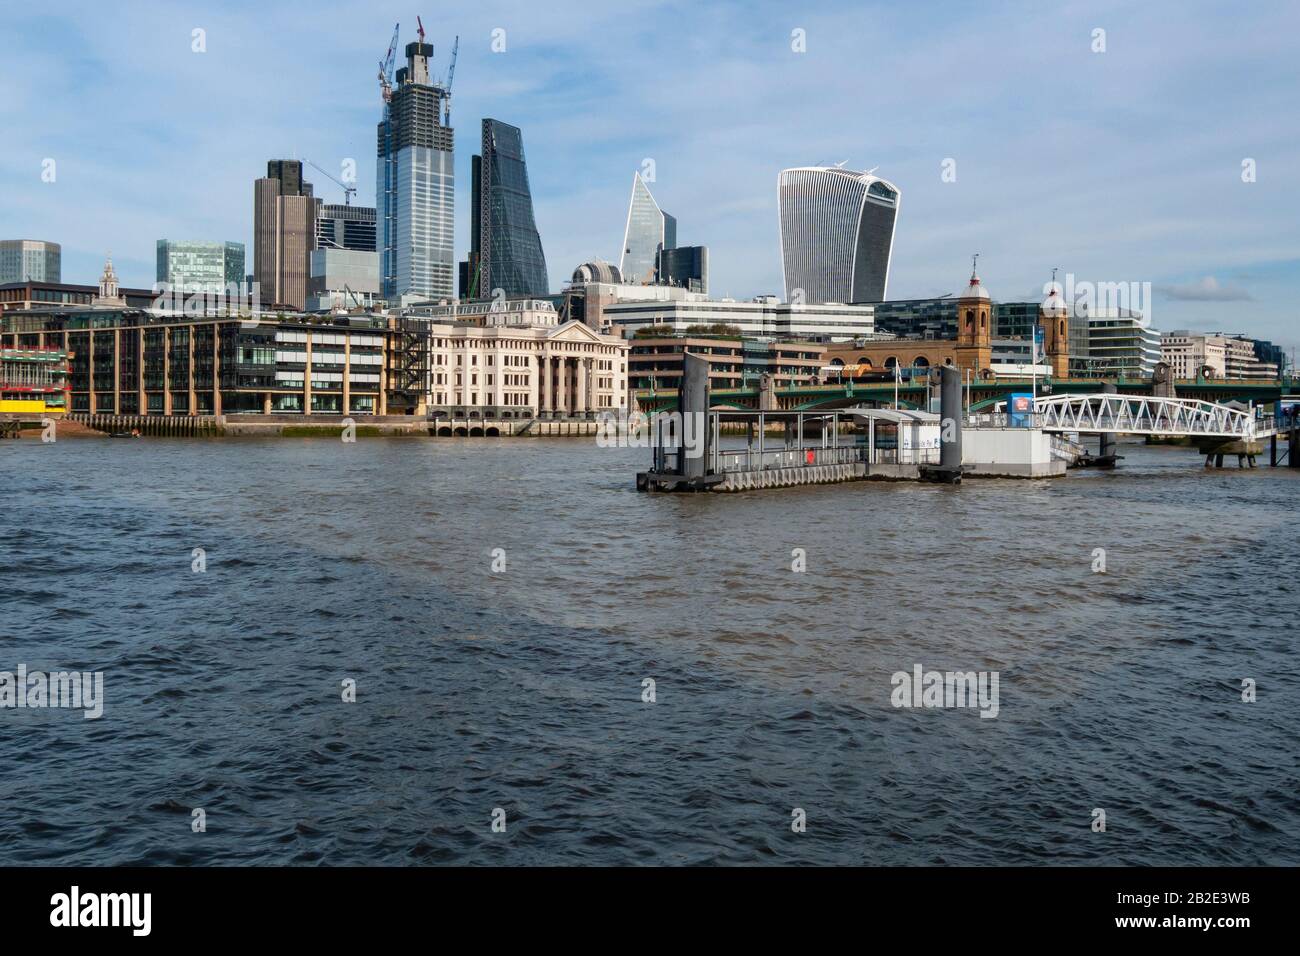 The London skyline is seen over the Thames, including 20 Fenchurch Street Tower and the Leadenhall Building. 22 Bishopsgate is under construction. Stock Photo